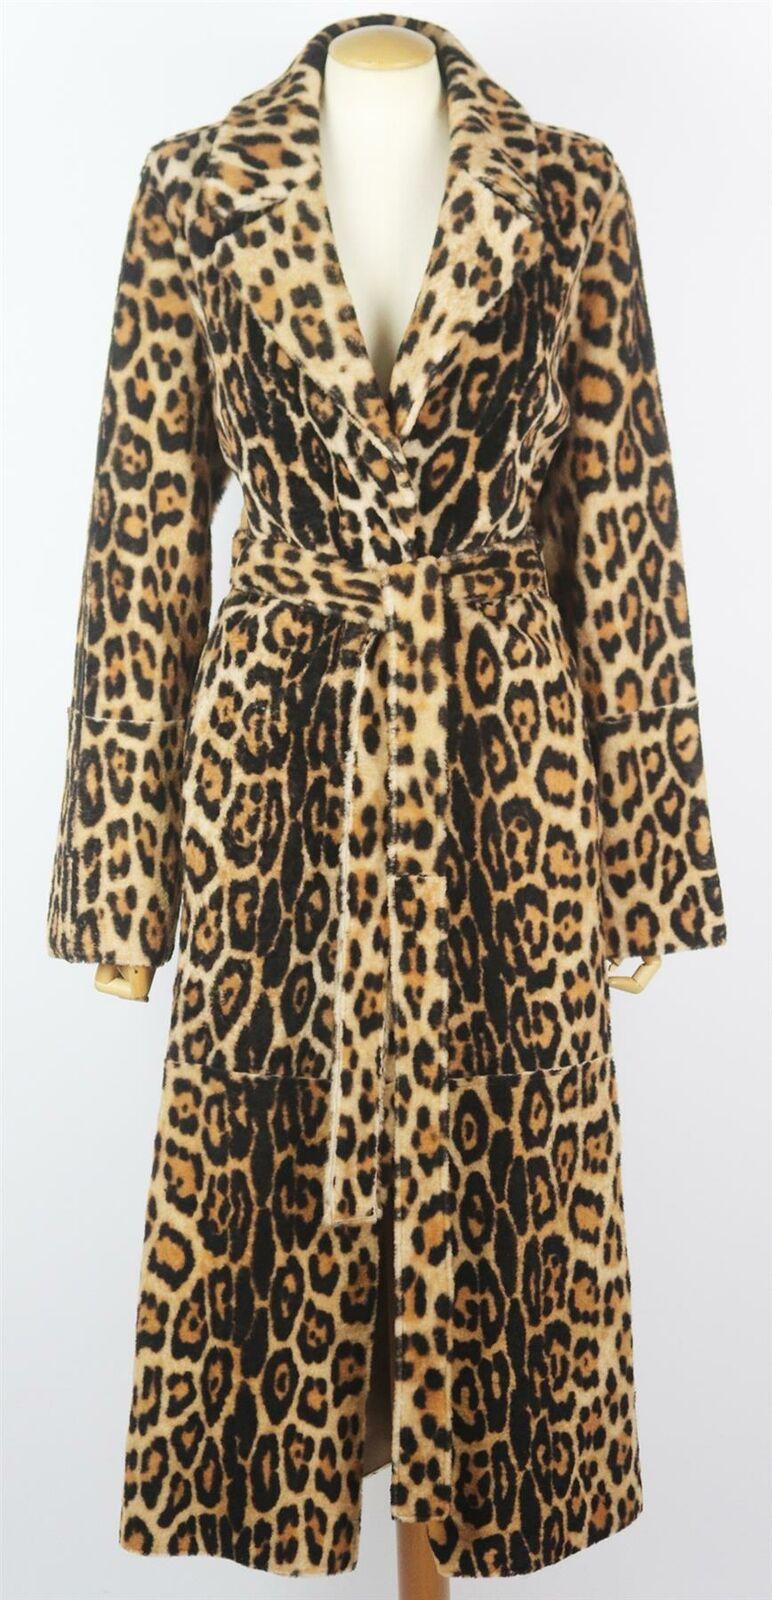 This Yves Salomon 'Lacon' coat allows you to fully embrace animal prints, it's made from fuzzy shearling and has notch lapels and a self-tie belt to cinch the loose silhouette with smooth leather reverse side.
Black, brown and beige leopard-print